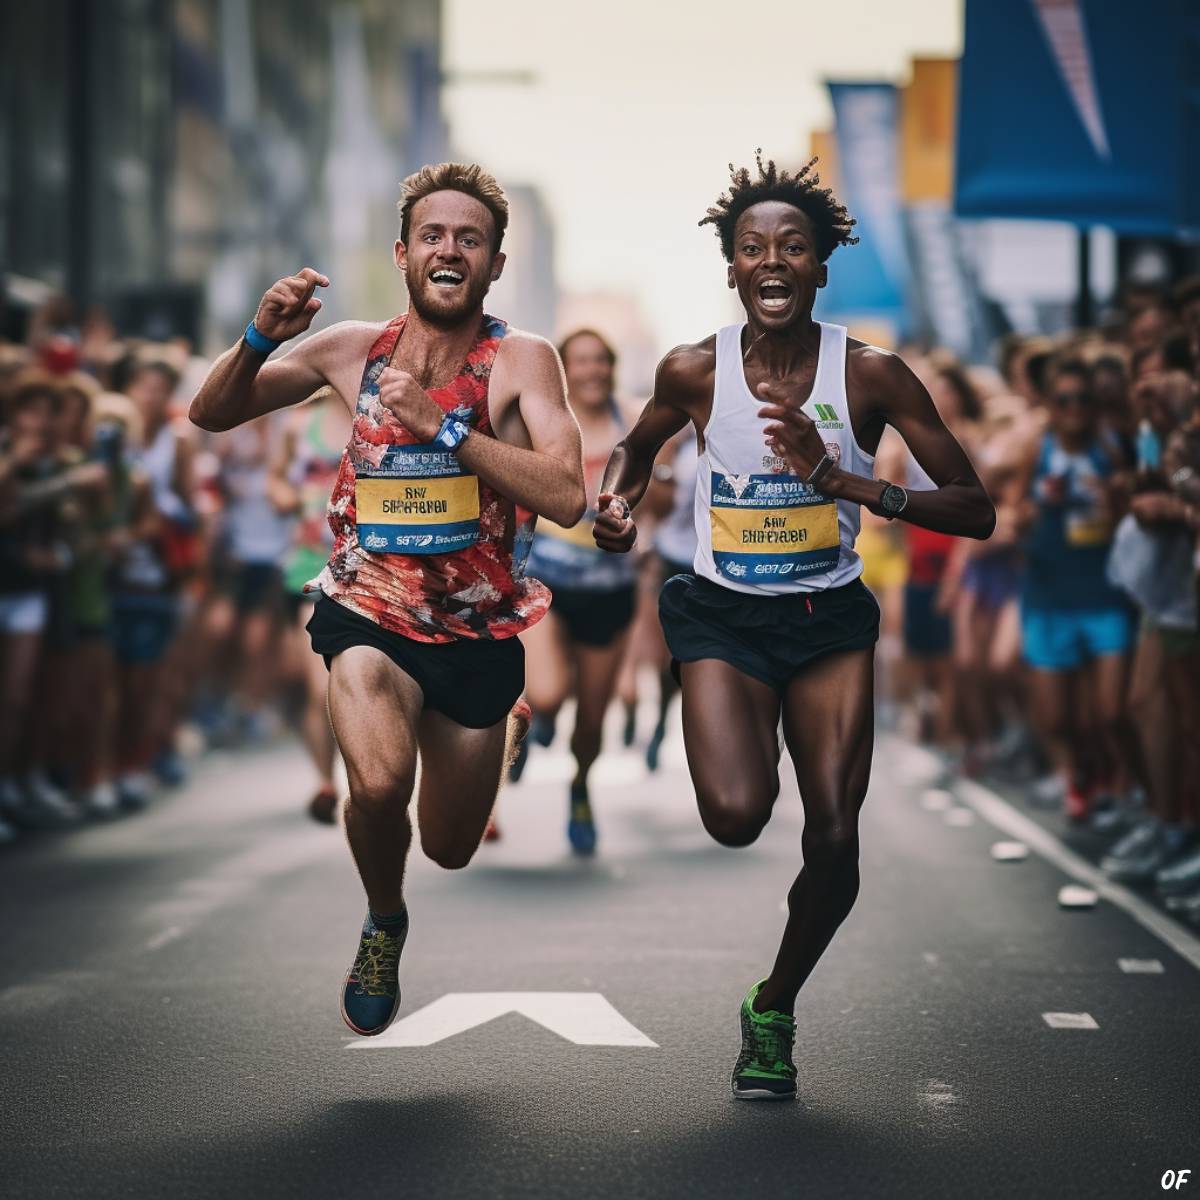 Two runners competing in a marathon.